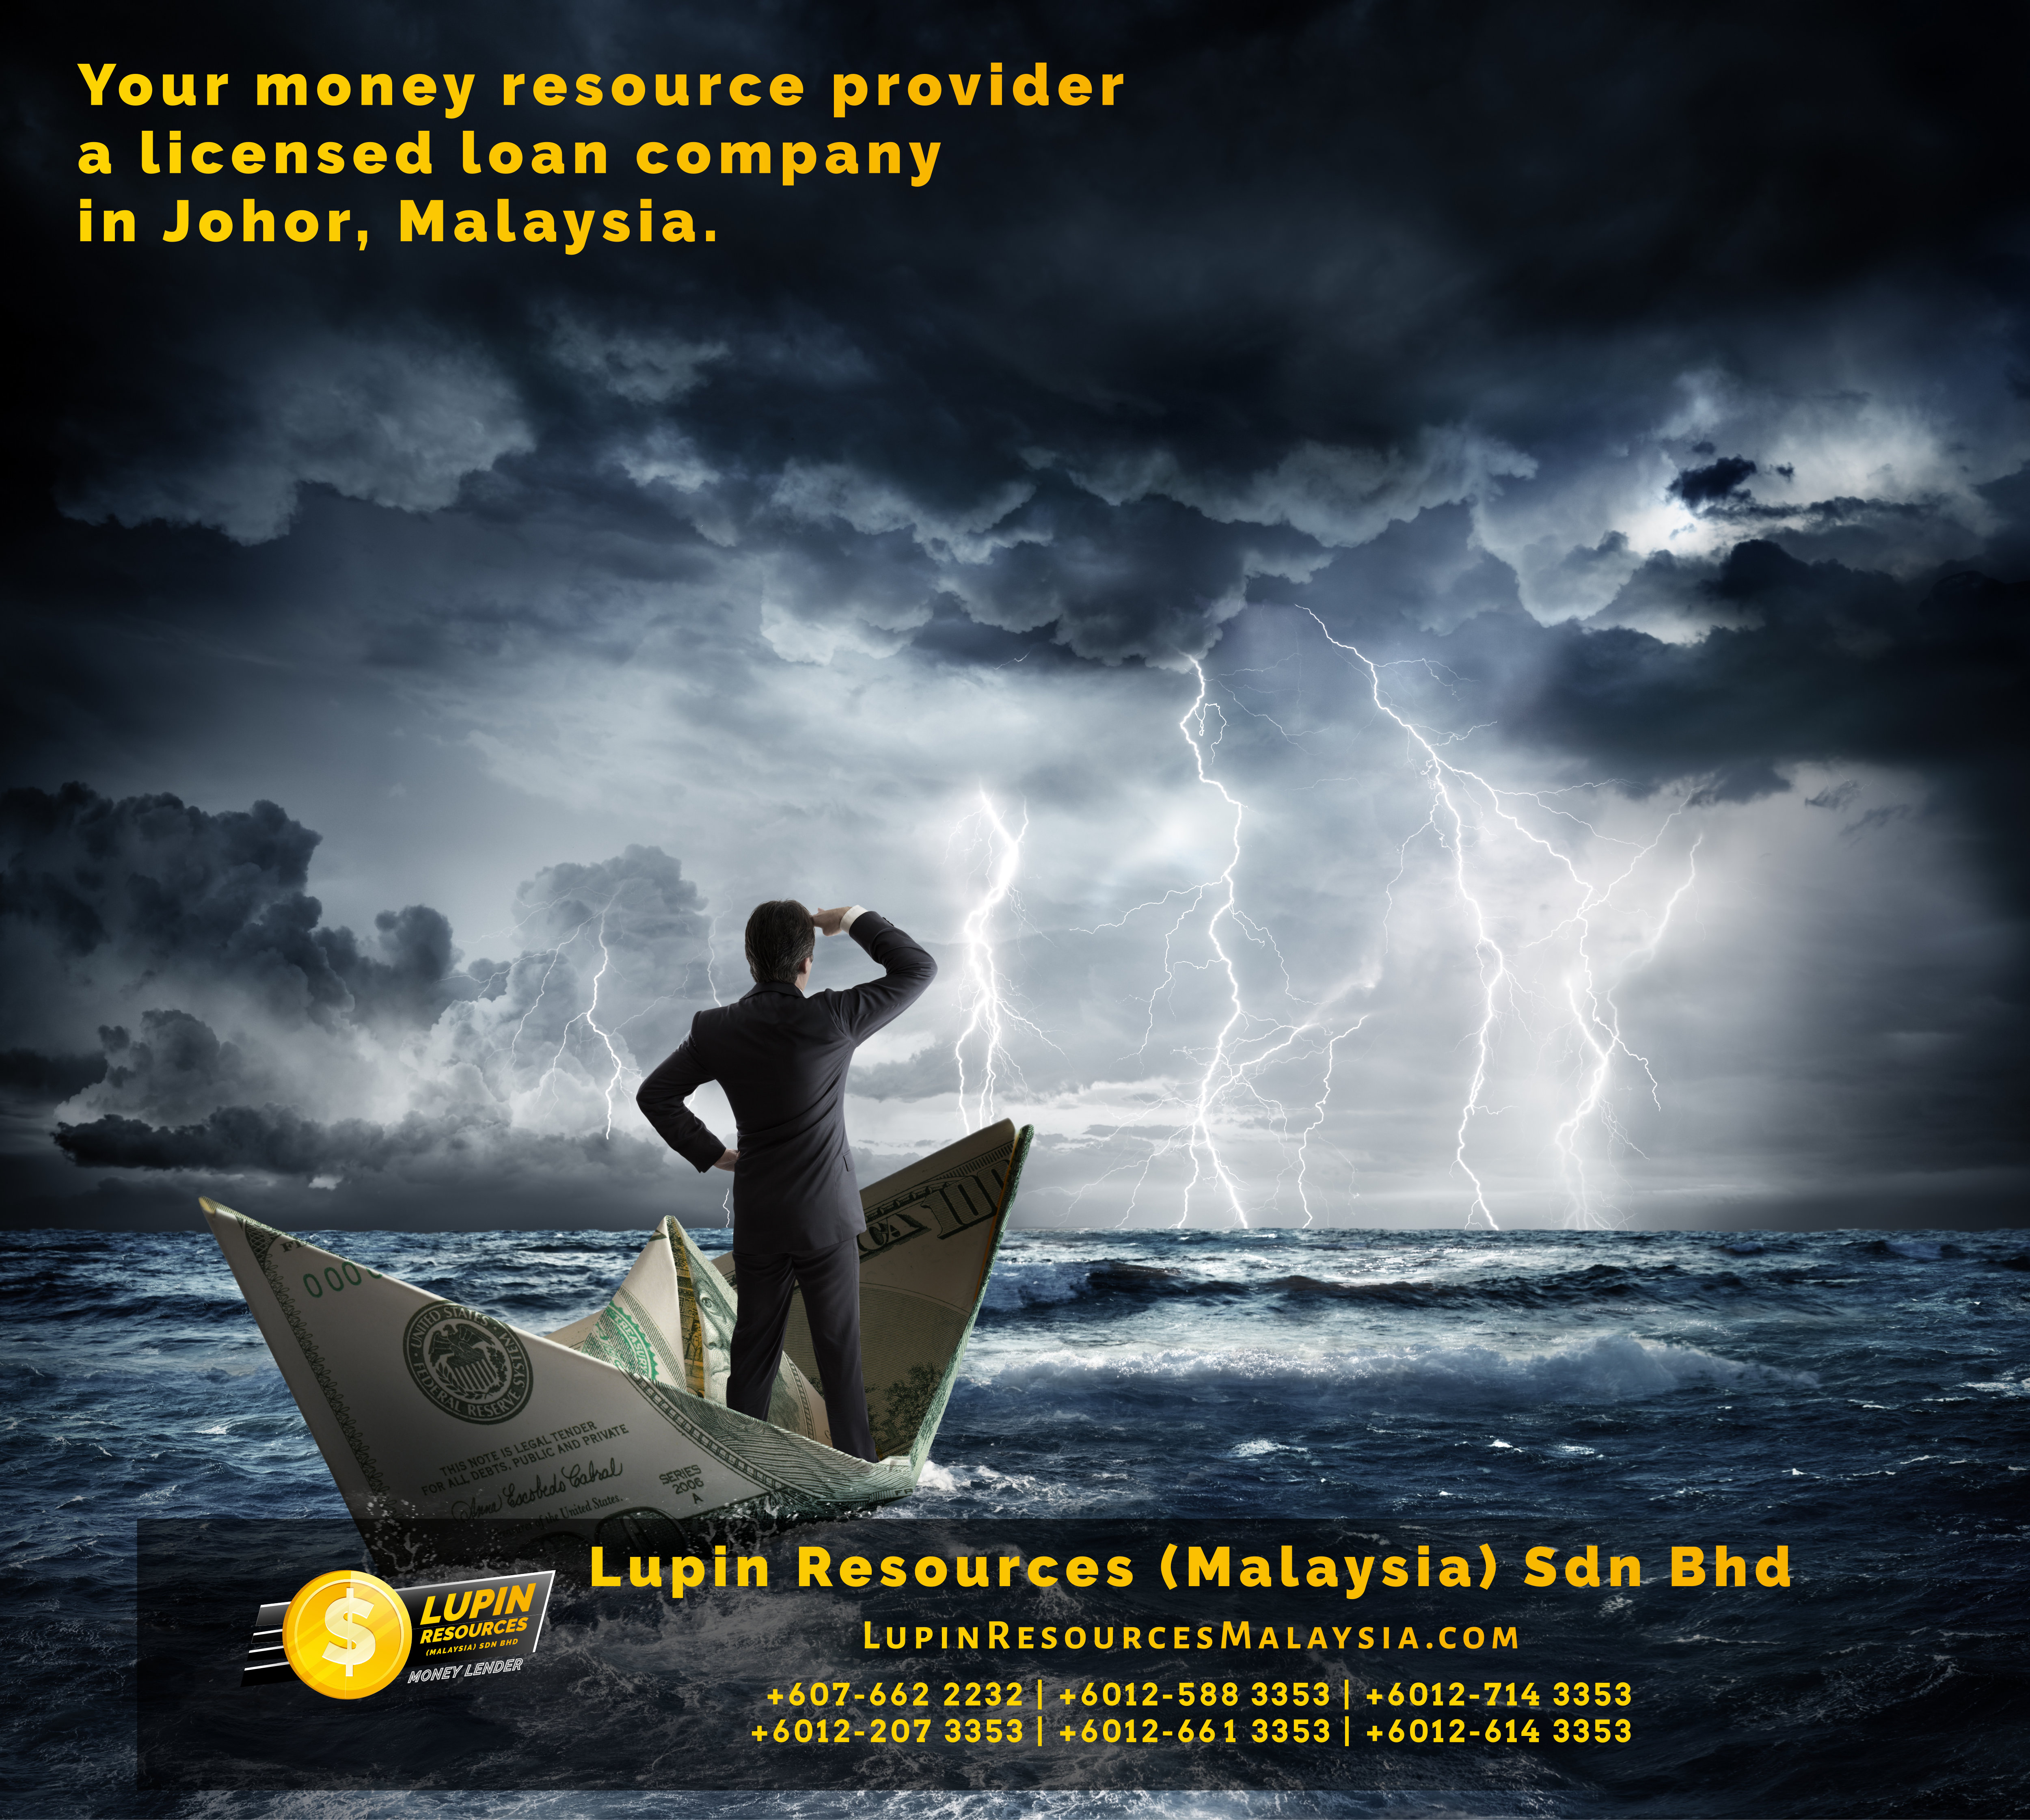 Johor Licensed Loan Company Licensed Money Lender Lupin Resources Malaysia SDN BHD Your money resource provider Kulai Johor Bahru Johor Malaysia Business Loan A01-07